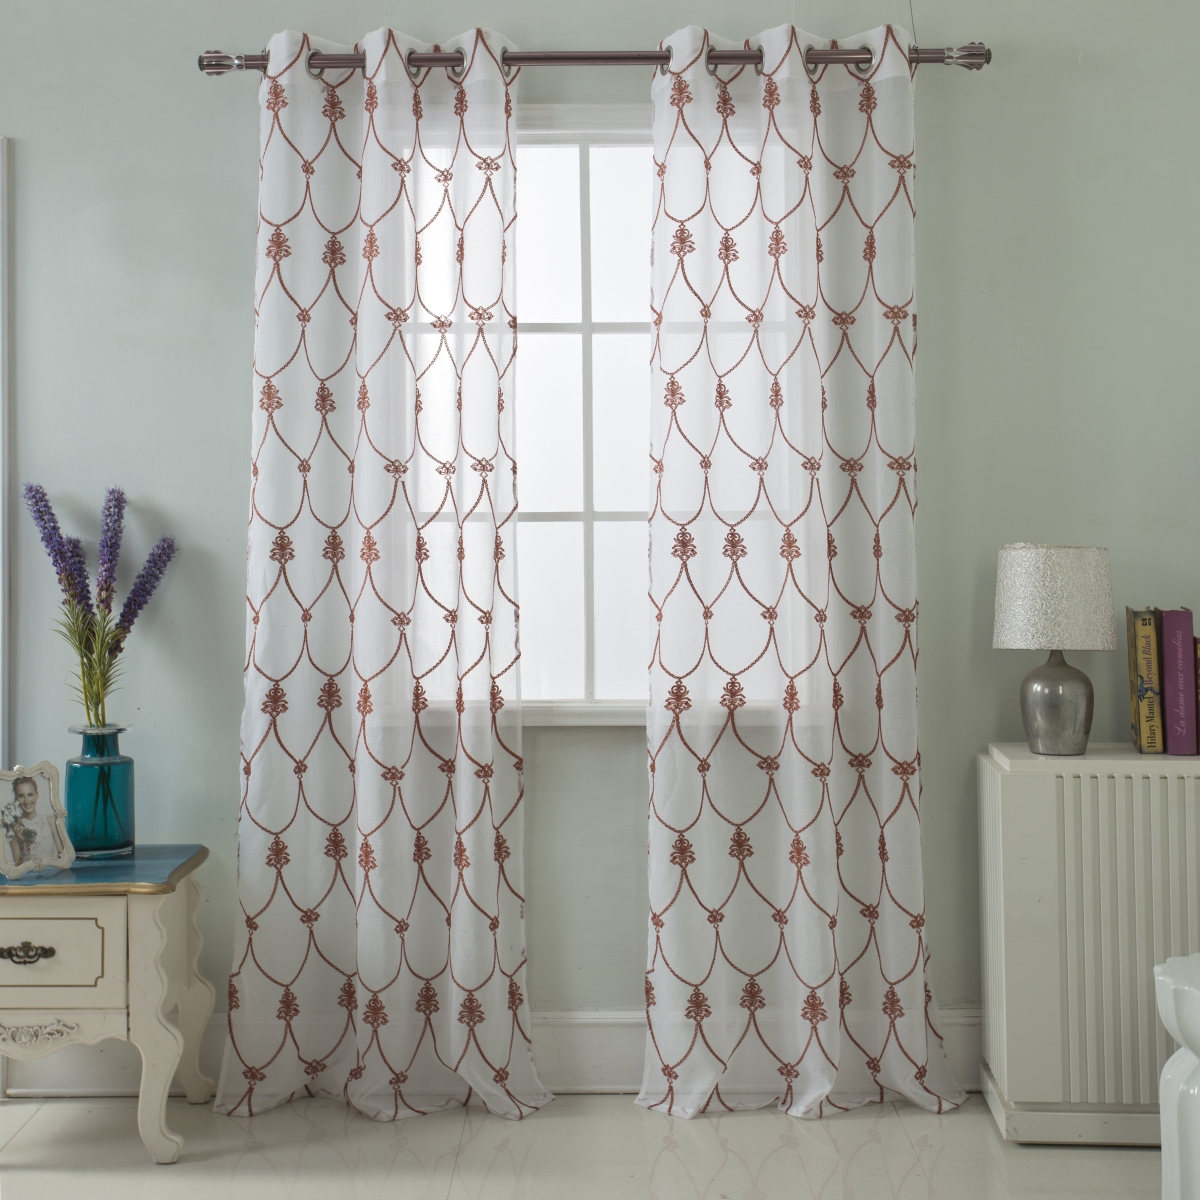 Pnw16986 76 X 84 In. Westgate Embroidered Grommet Curtain Panel, Spice - Set Of 2